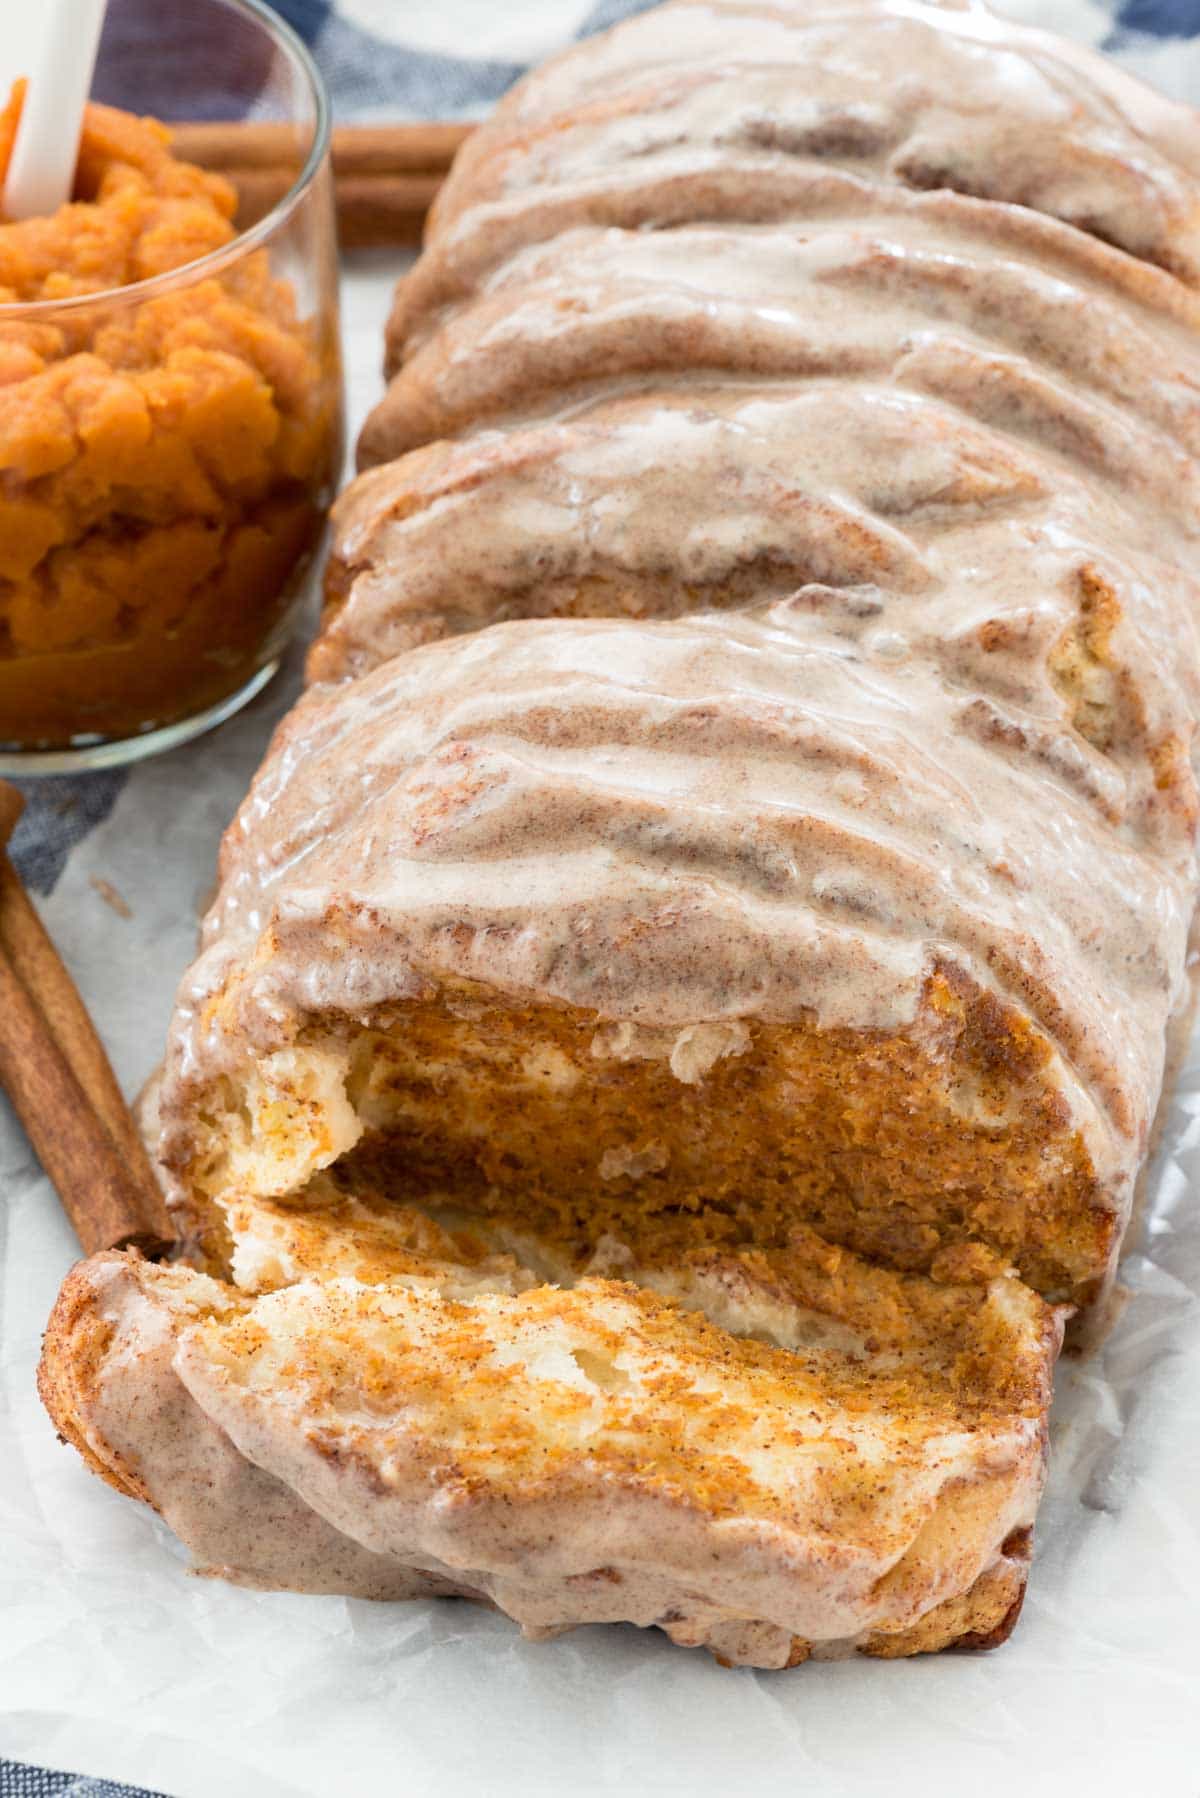 Easy Pumpkin Pull Apart Bread - this is the perfect pumpkin recipe! Refrigerated biscuits filled with pumpkin pie mixture - it's like pumpkin pie for breakfast!